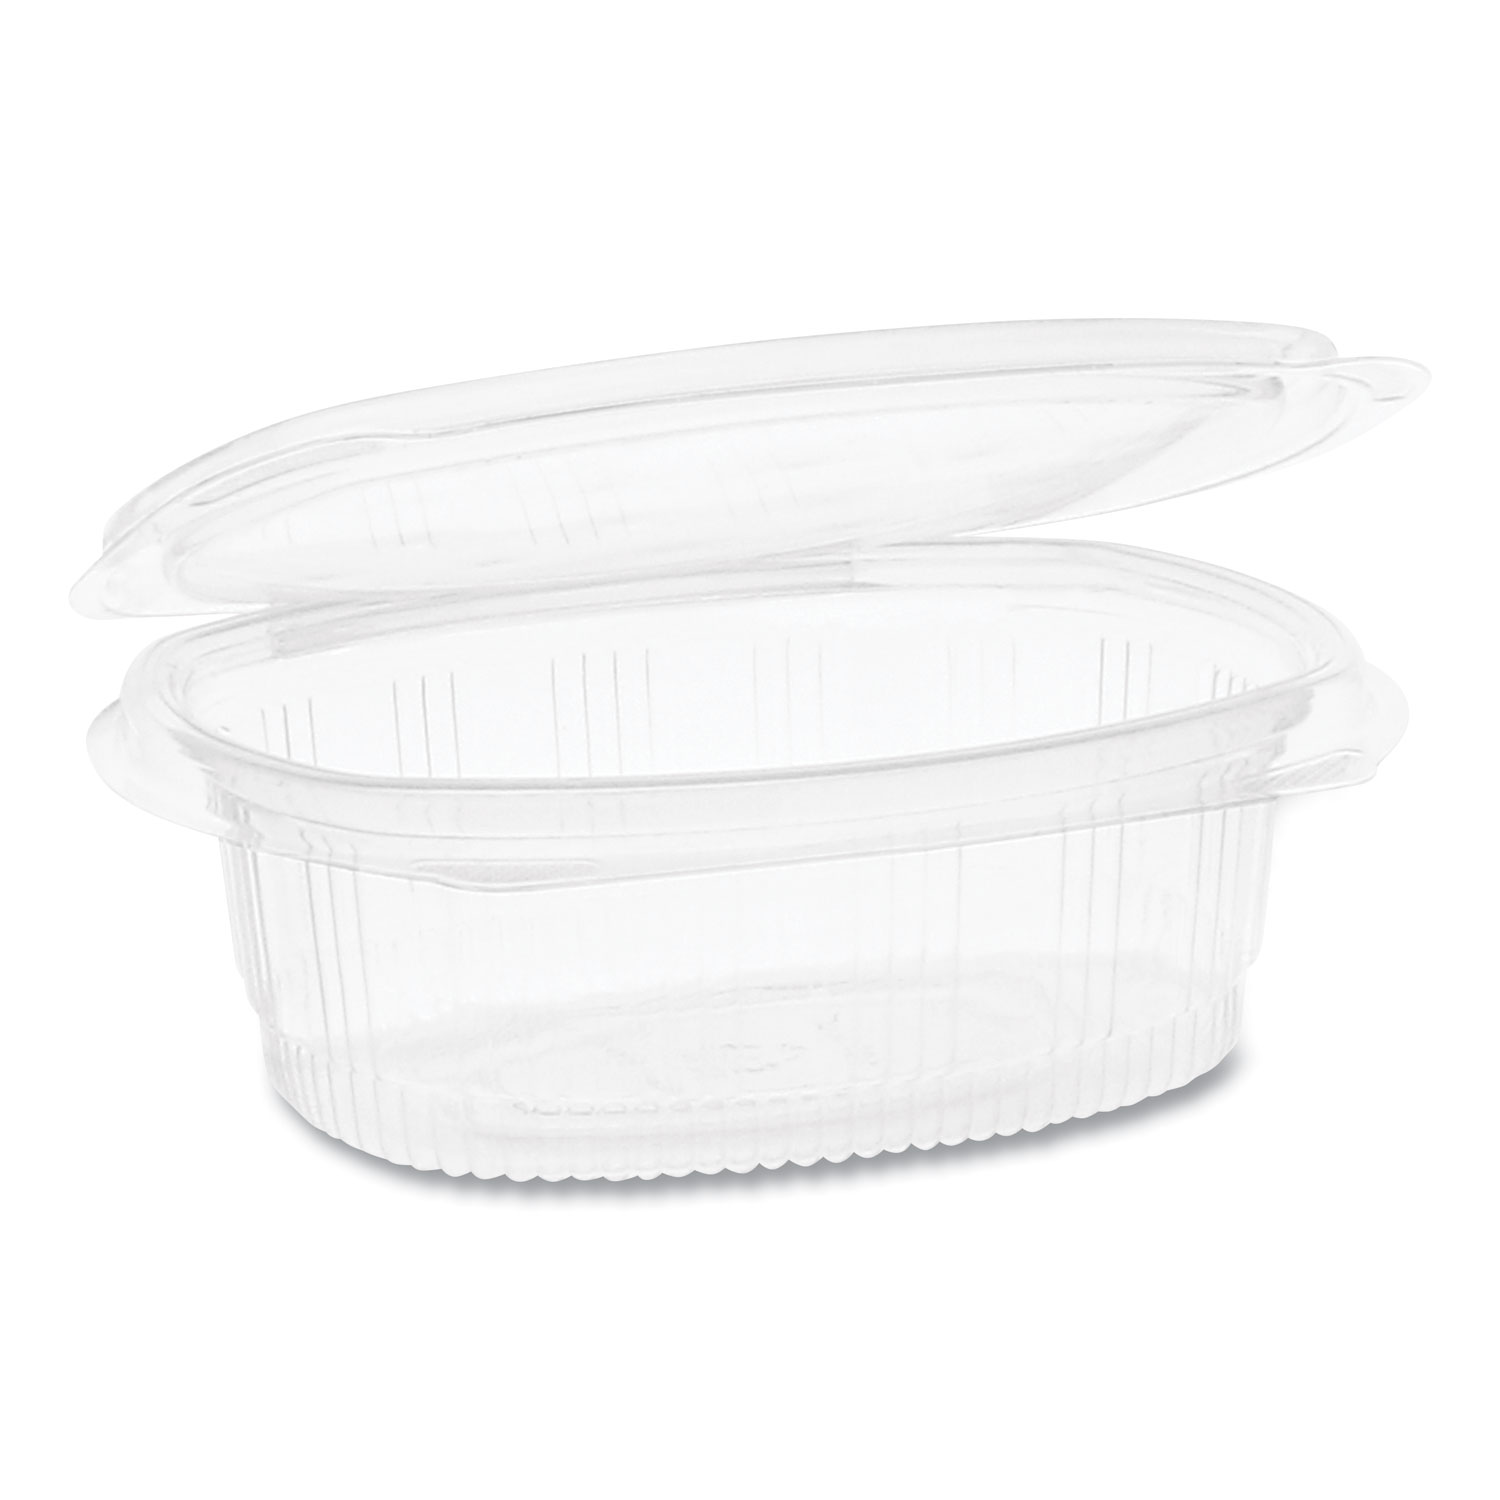 Pactiv EarthChoice PET Hinged Lid Deli Container, 4.92 x 5.87 x 2.48, 16 oz, 1-Compartment, Clear, 200/Carton